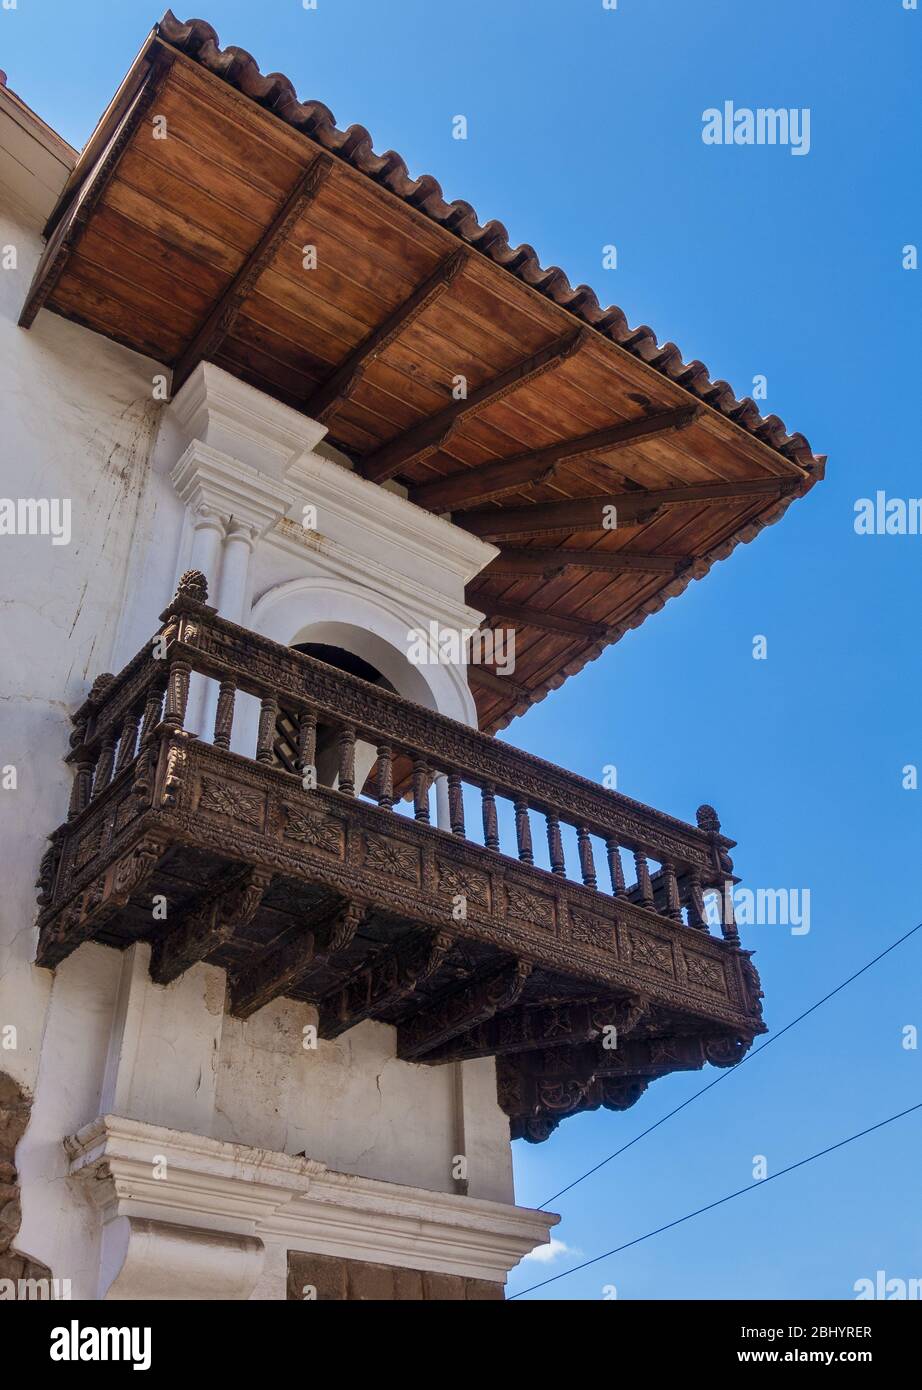 Decorative carved wooden balcony dating back to the Spanish colonial era in the city of Cusco, Peru Stock Photo